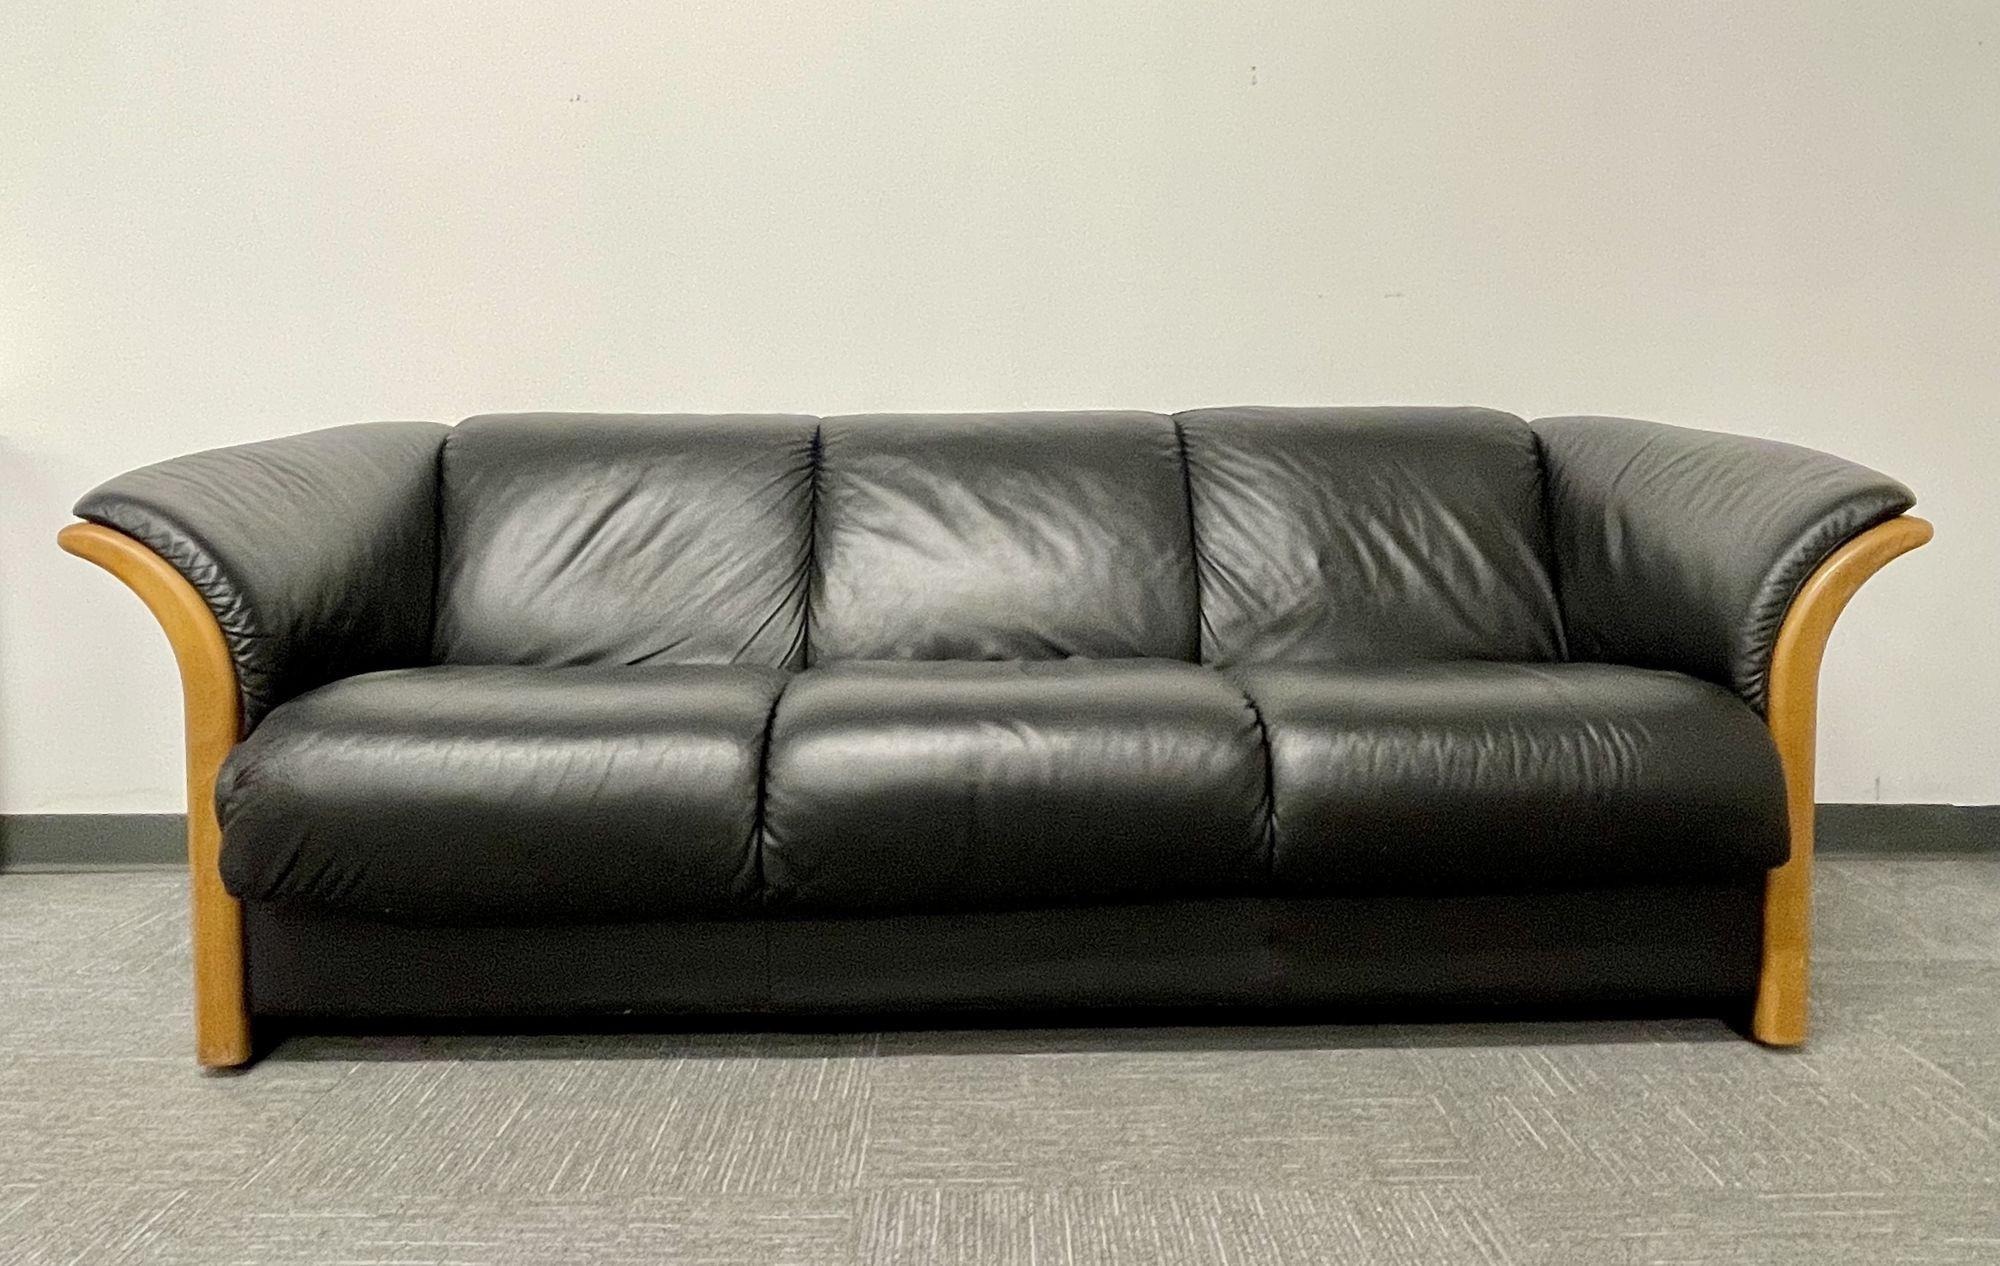 Mid Century Modern Sofa, Couch, Wood Trim, Black Leather
 
A finely detailed Mid Century Modern Sofa. This three seater in a clean black leather having burl wood trimmed arms. 
 
Seat height: 17.5 in.
 
ESXA